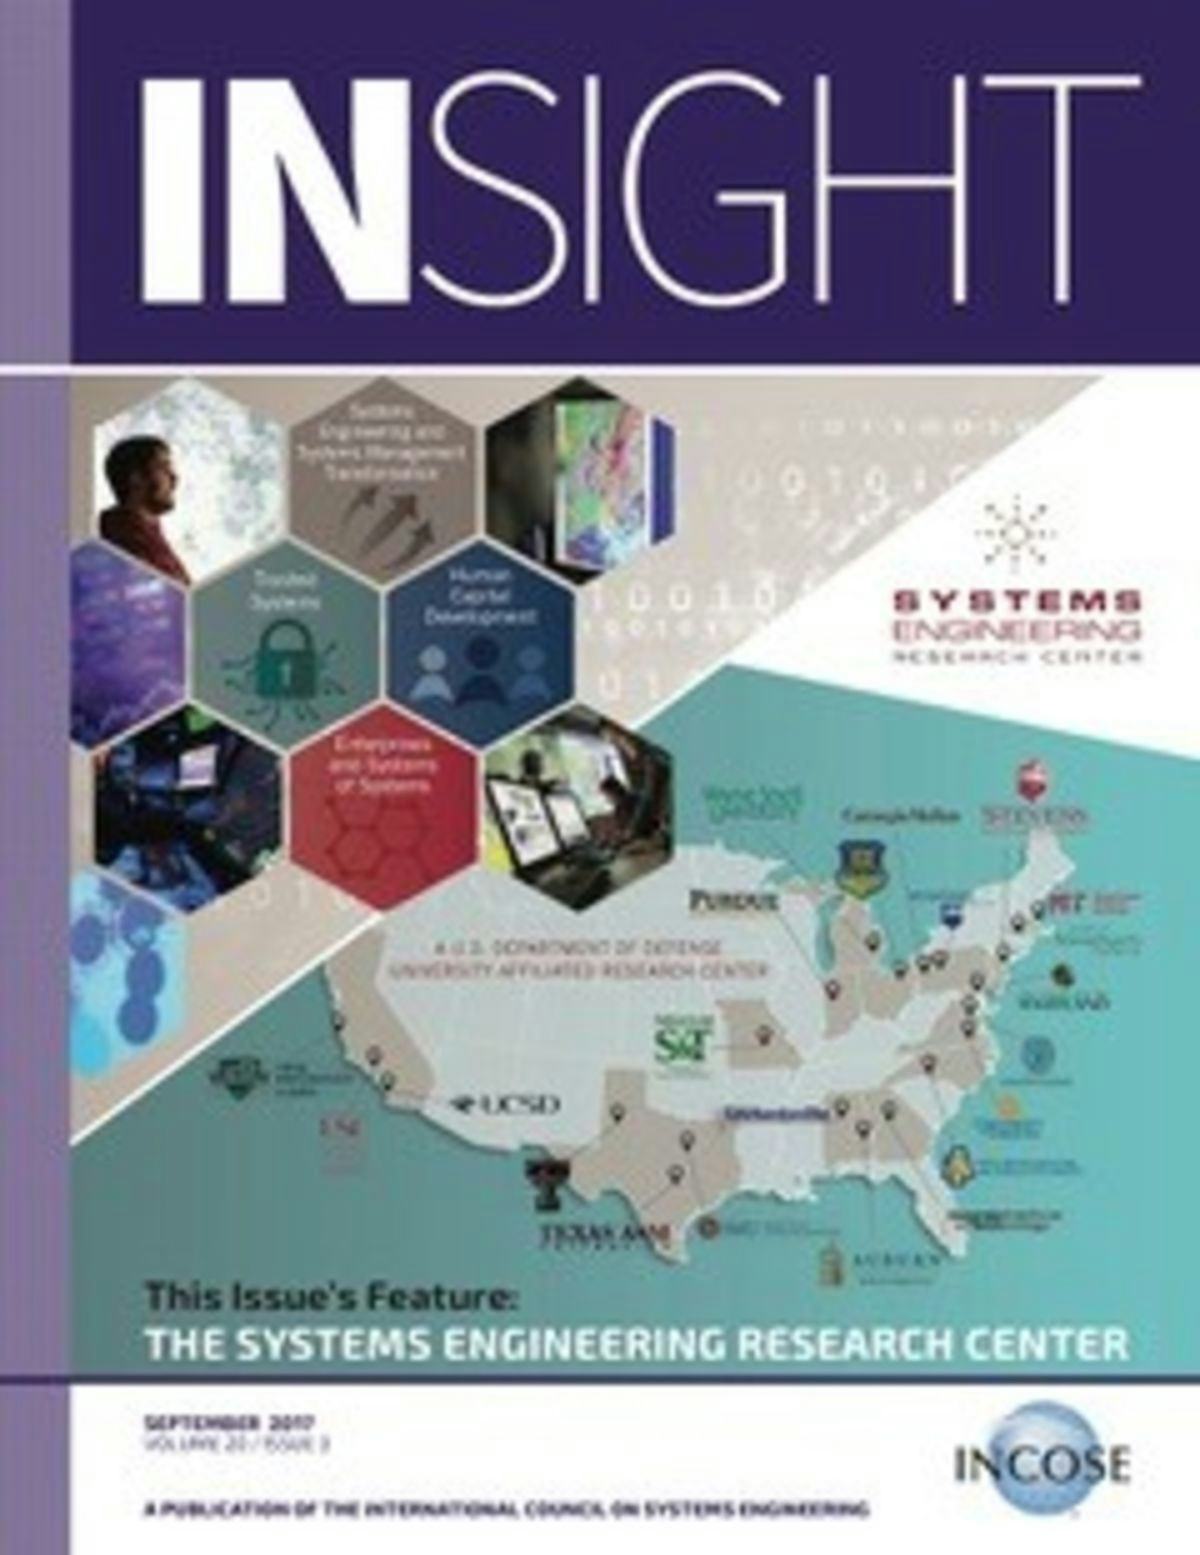 SERC on the cover of INSIGHT magazine published by INCOSE